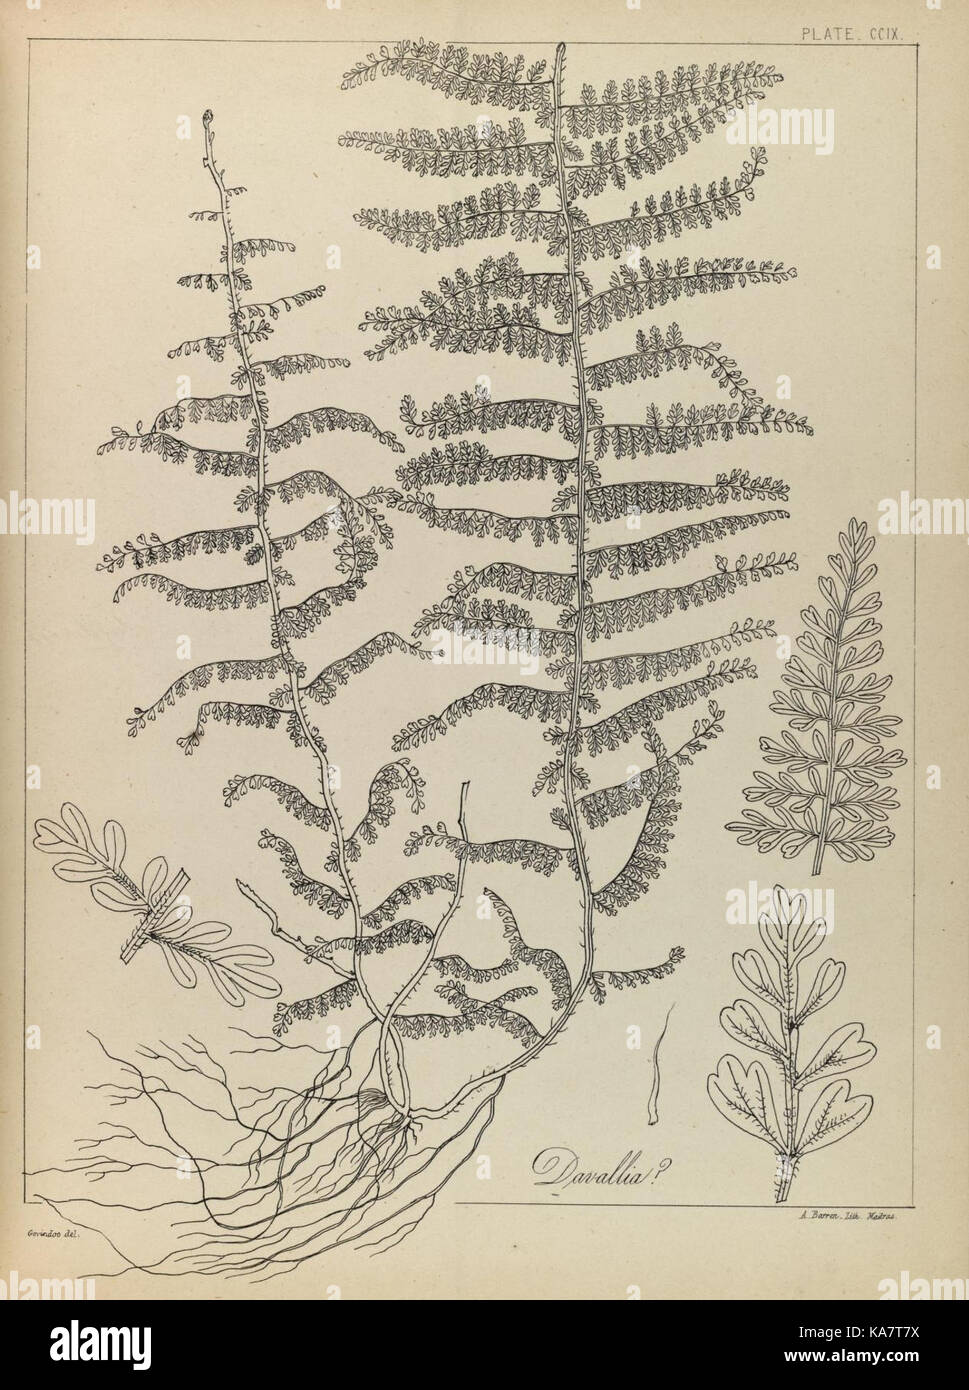 The ferns of British India (PLATE CCIX) (8531523176) Stock Photo